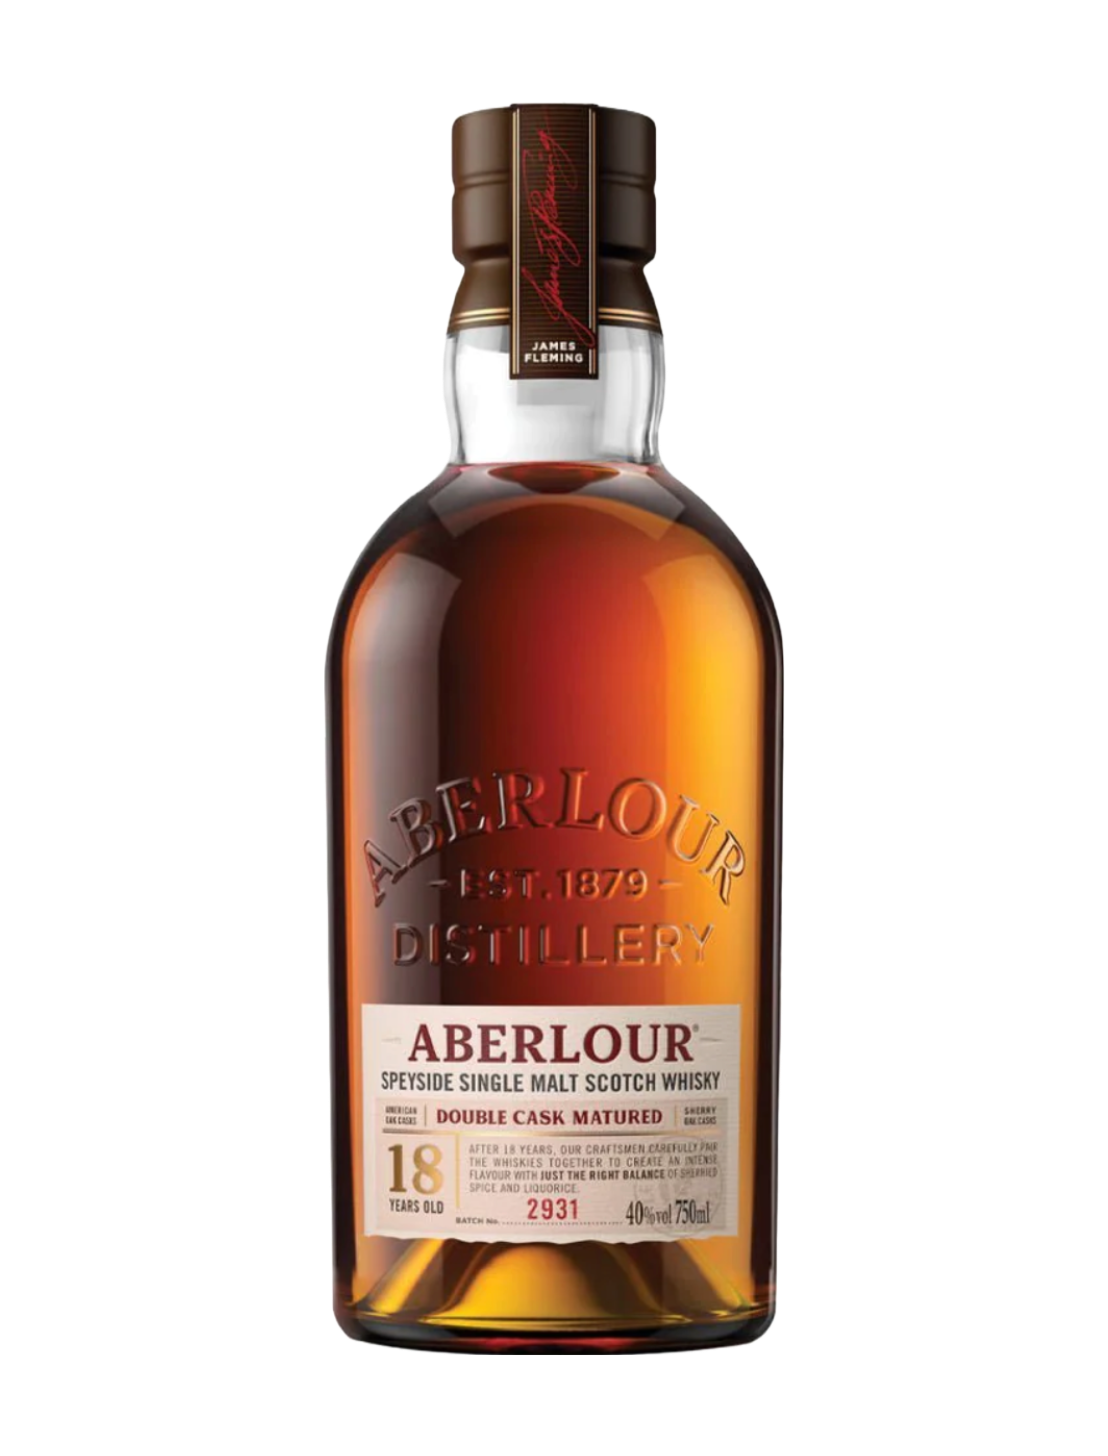 An elegant bottle of Aberlour 18 Year Old Speyside Single Malt Scotch Whisky in front of a plain white background